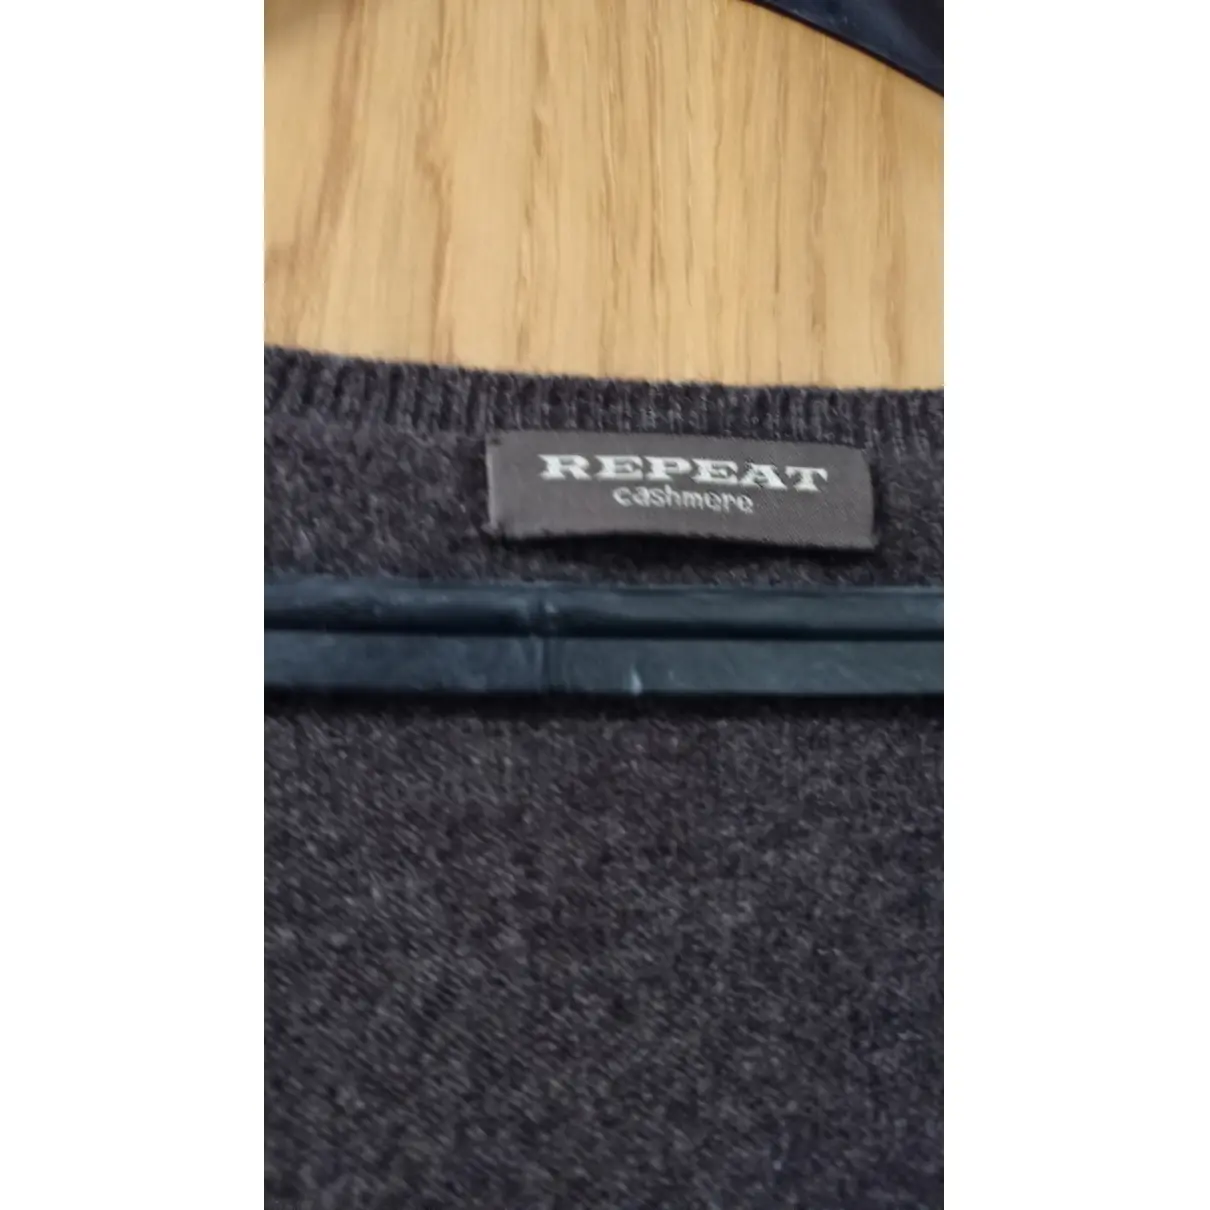 Buy Repeat Cashmere cardigan online